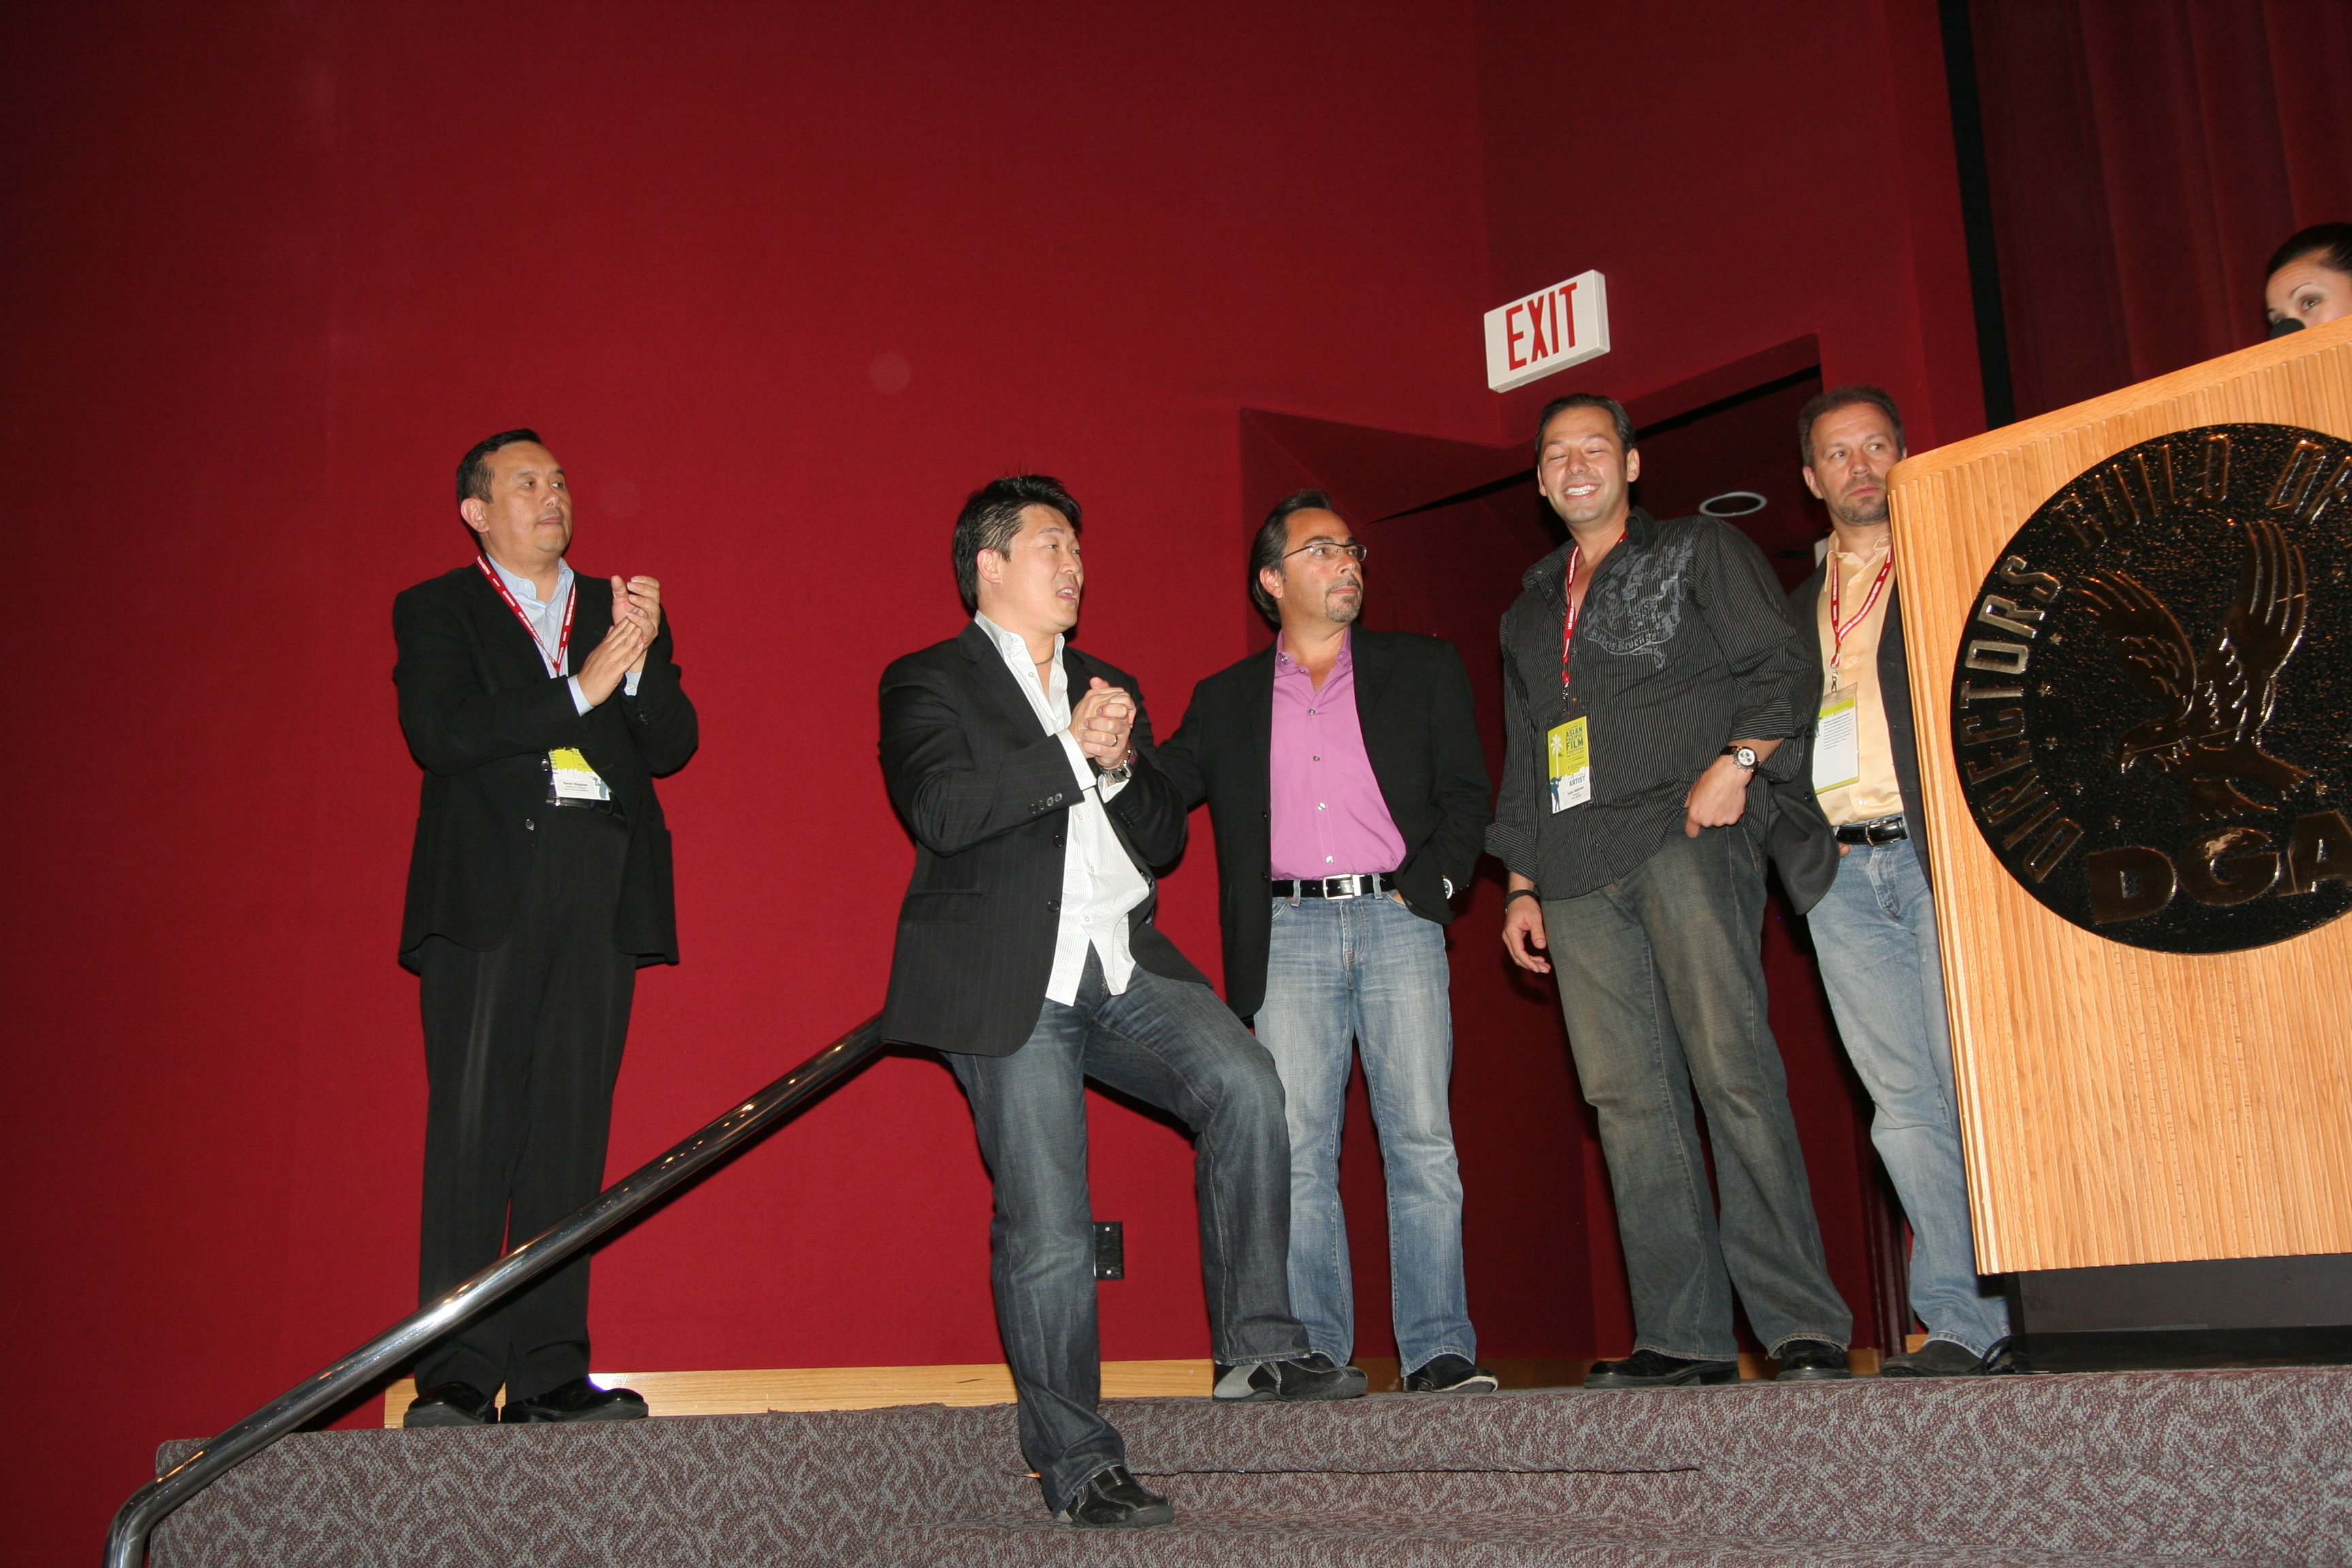 (L to R) Festival Director, David Magdael, and Producing Team, Chil Kong, Sal Baldomar, Tarik Heitmann, Ron Balicki and D Lee Inosanto at the Premiere of THE SENSEI for the 24th Los Angeles Asian Pacific Film Festival